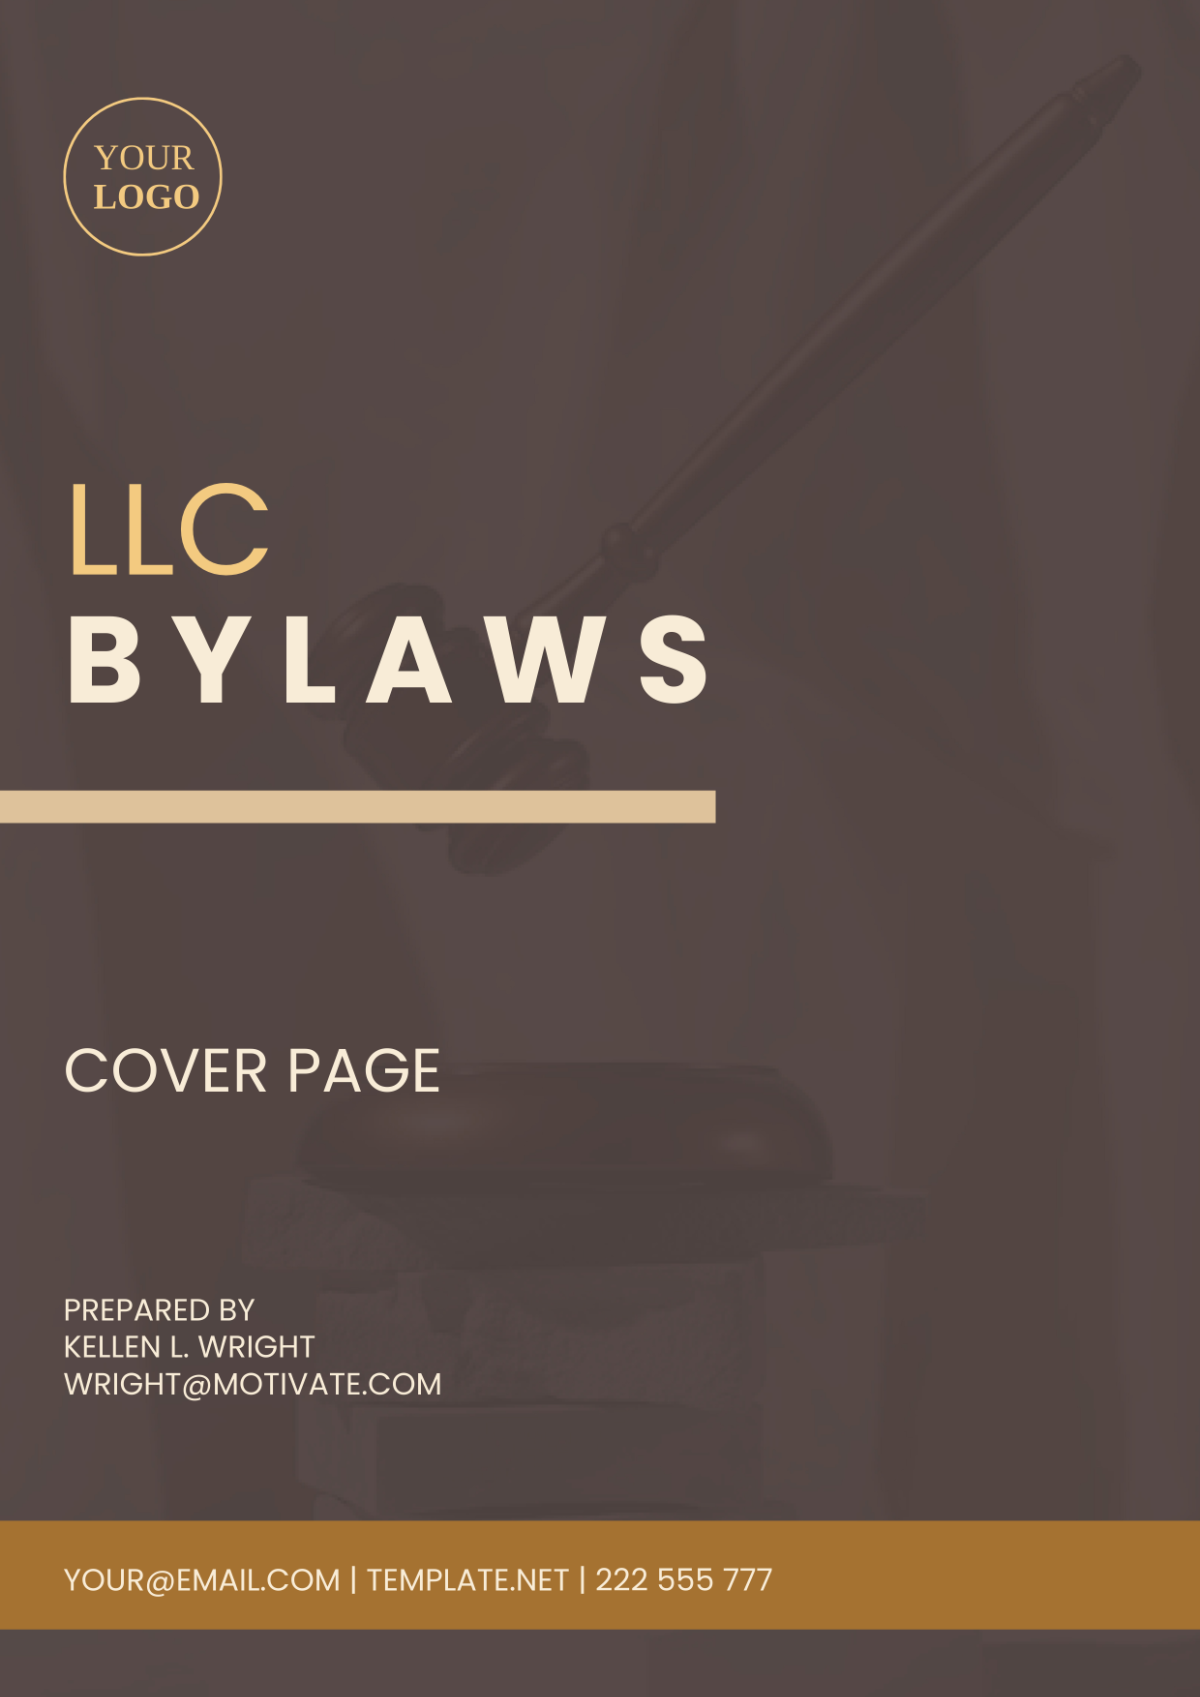 LLC Bylaws Cover Page